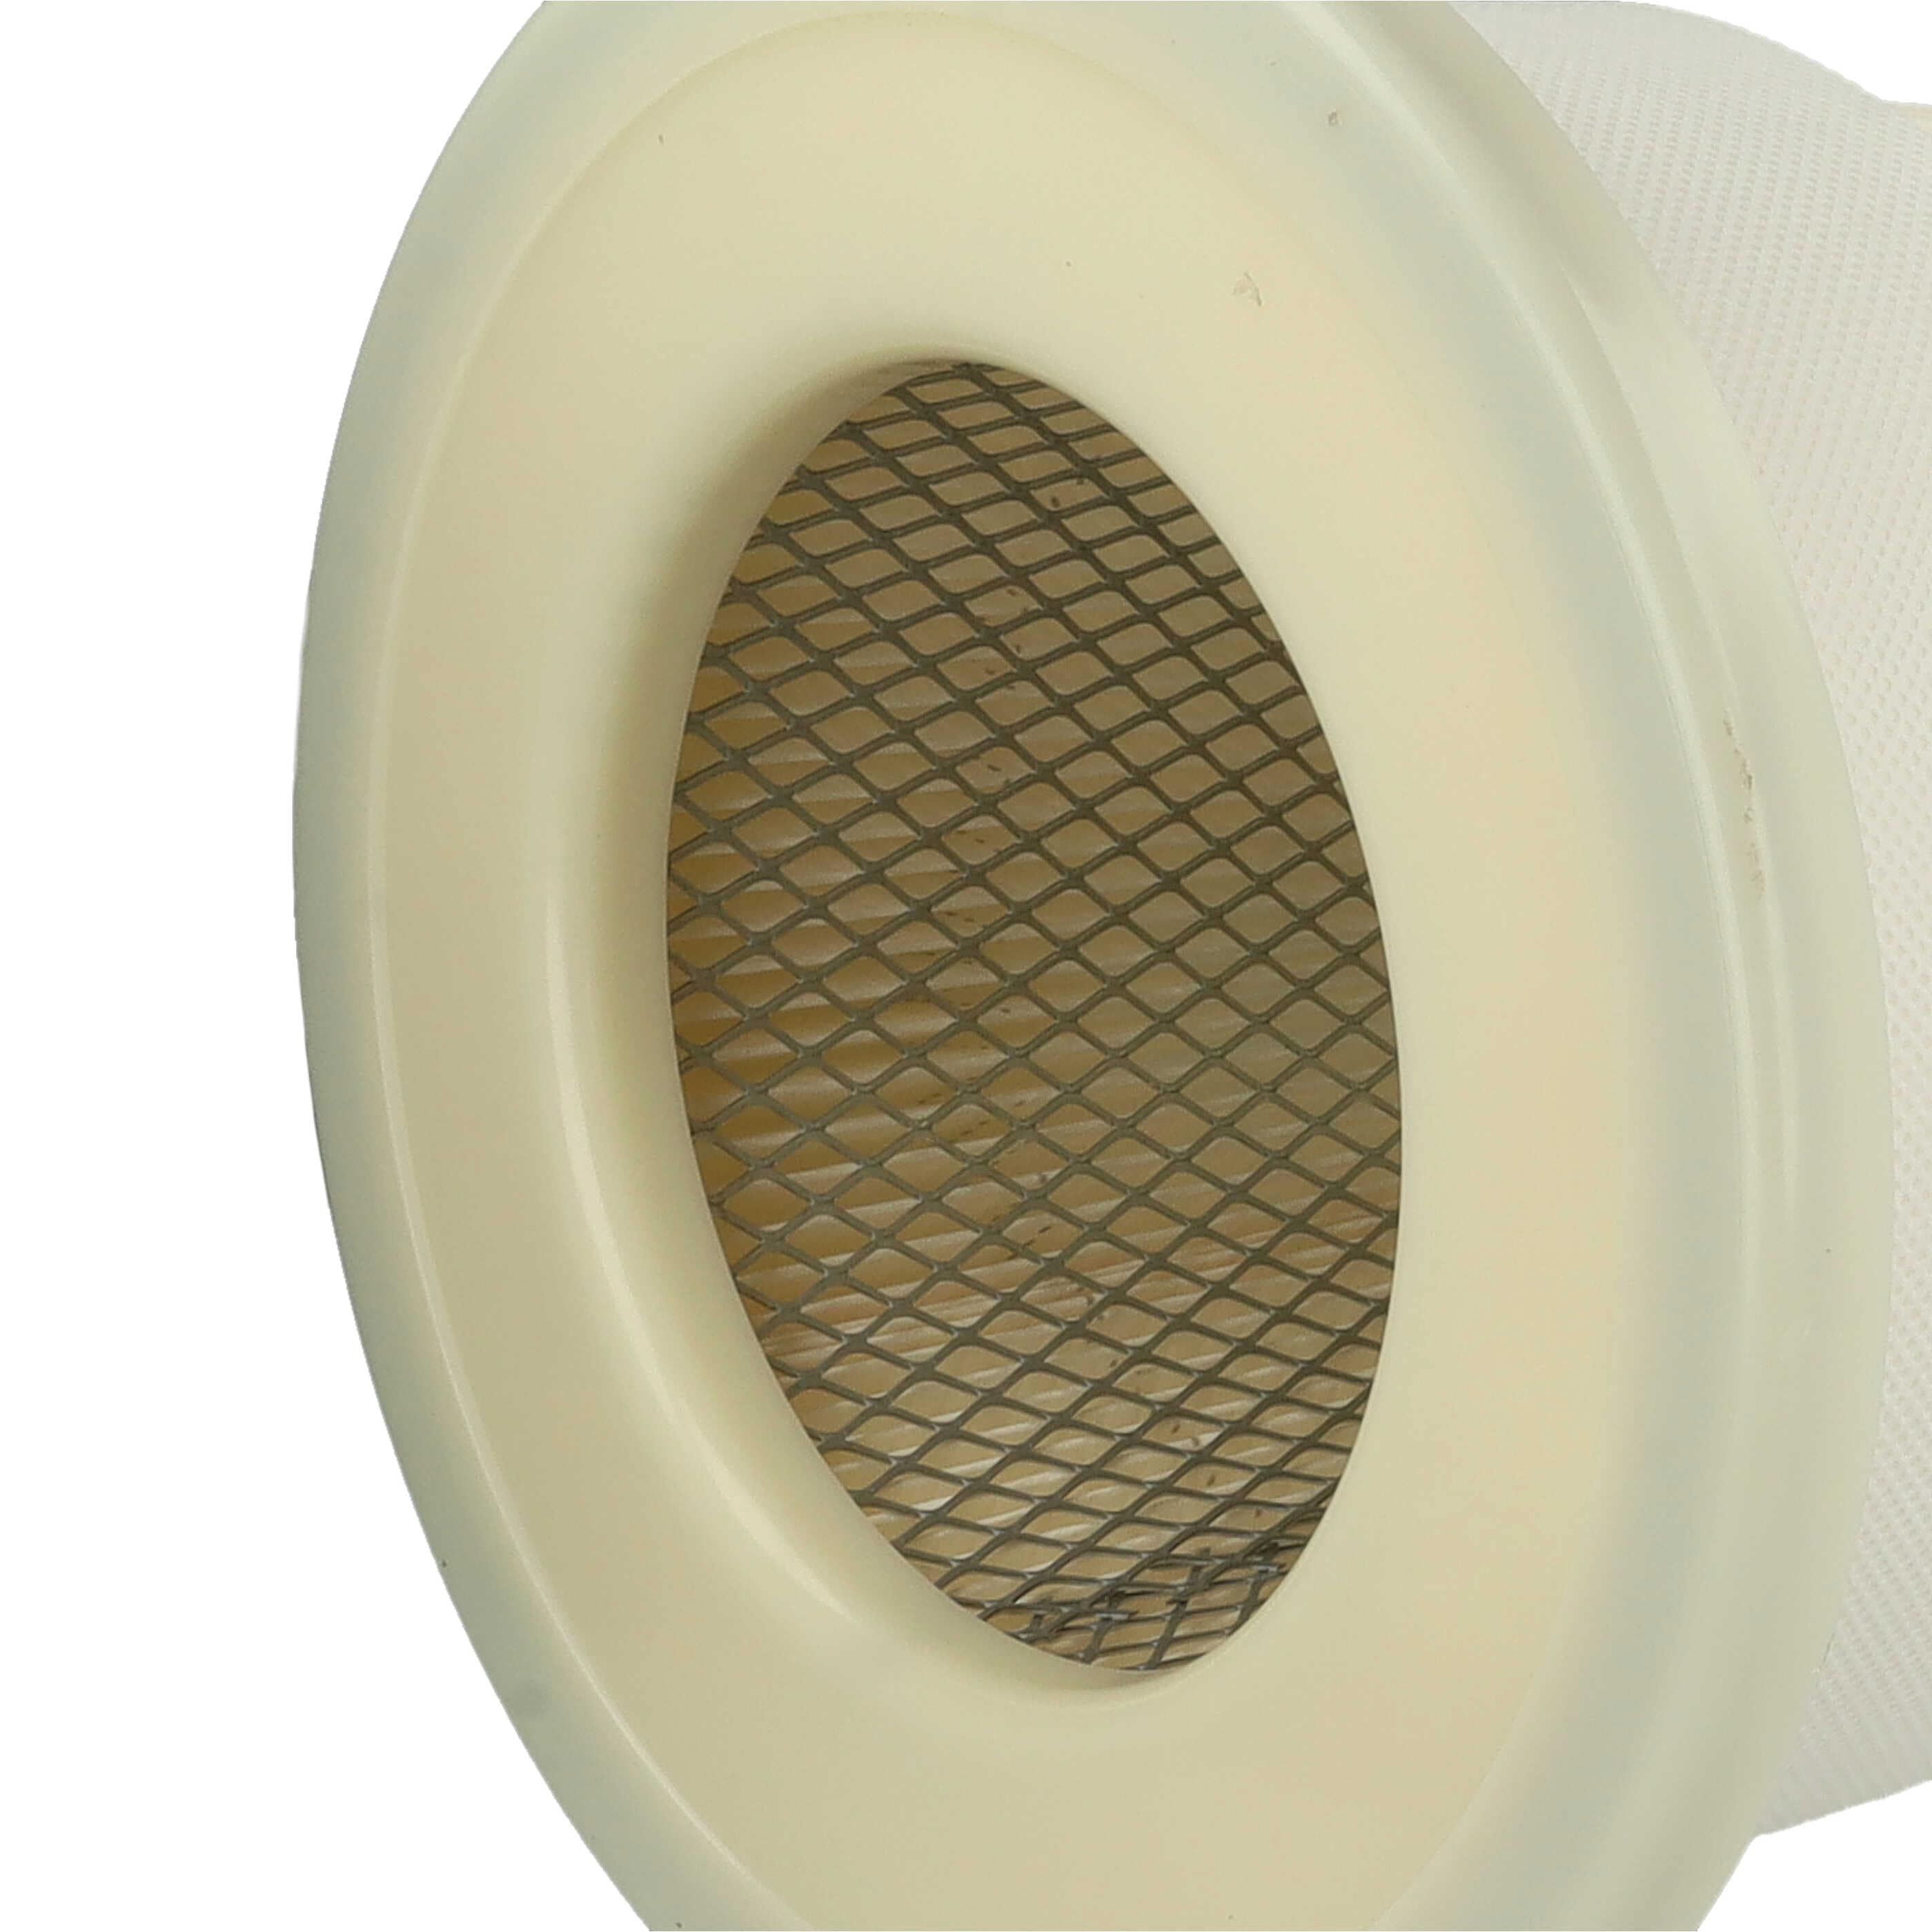 1x fine filter replaces Dustcontrol 42029 for Dustcontrol Vacuum Cleaner, white